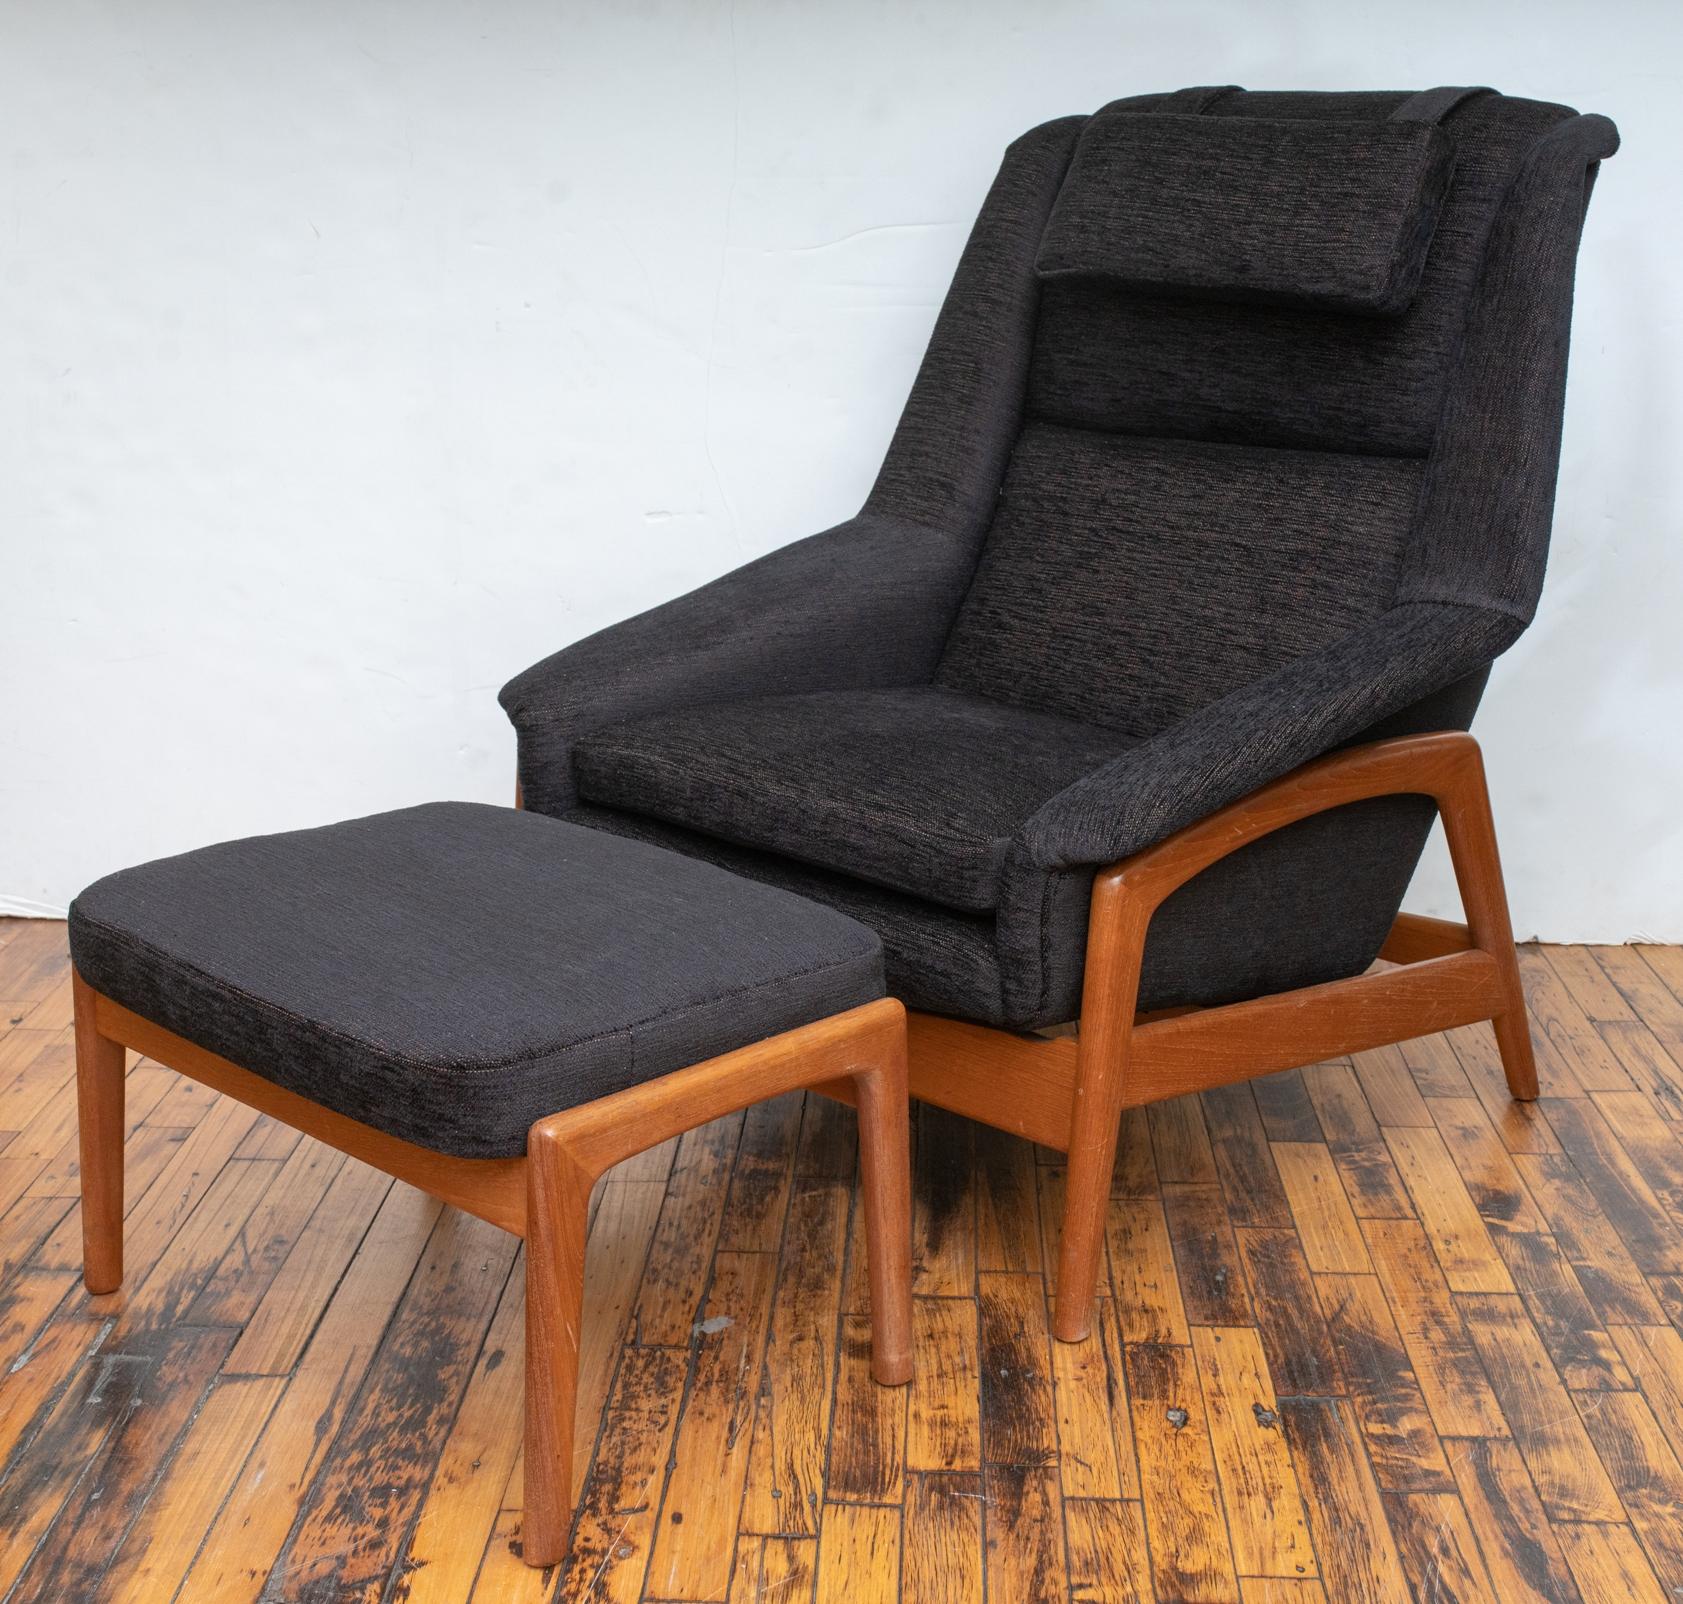 Manufactured by DUX in the 1960s. The chair has a sleek and classic designwith a modern appearence. The ottoman is adjustable. Recently upholstered in a black chenille fabric with underlying multi-colored threads. Removable headrest.